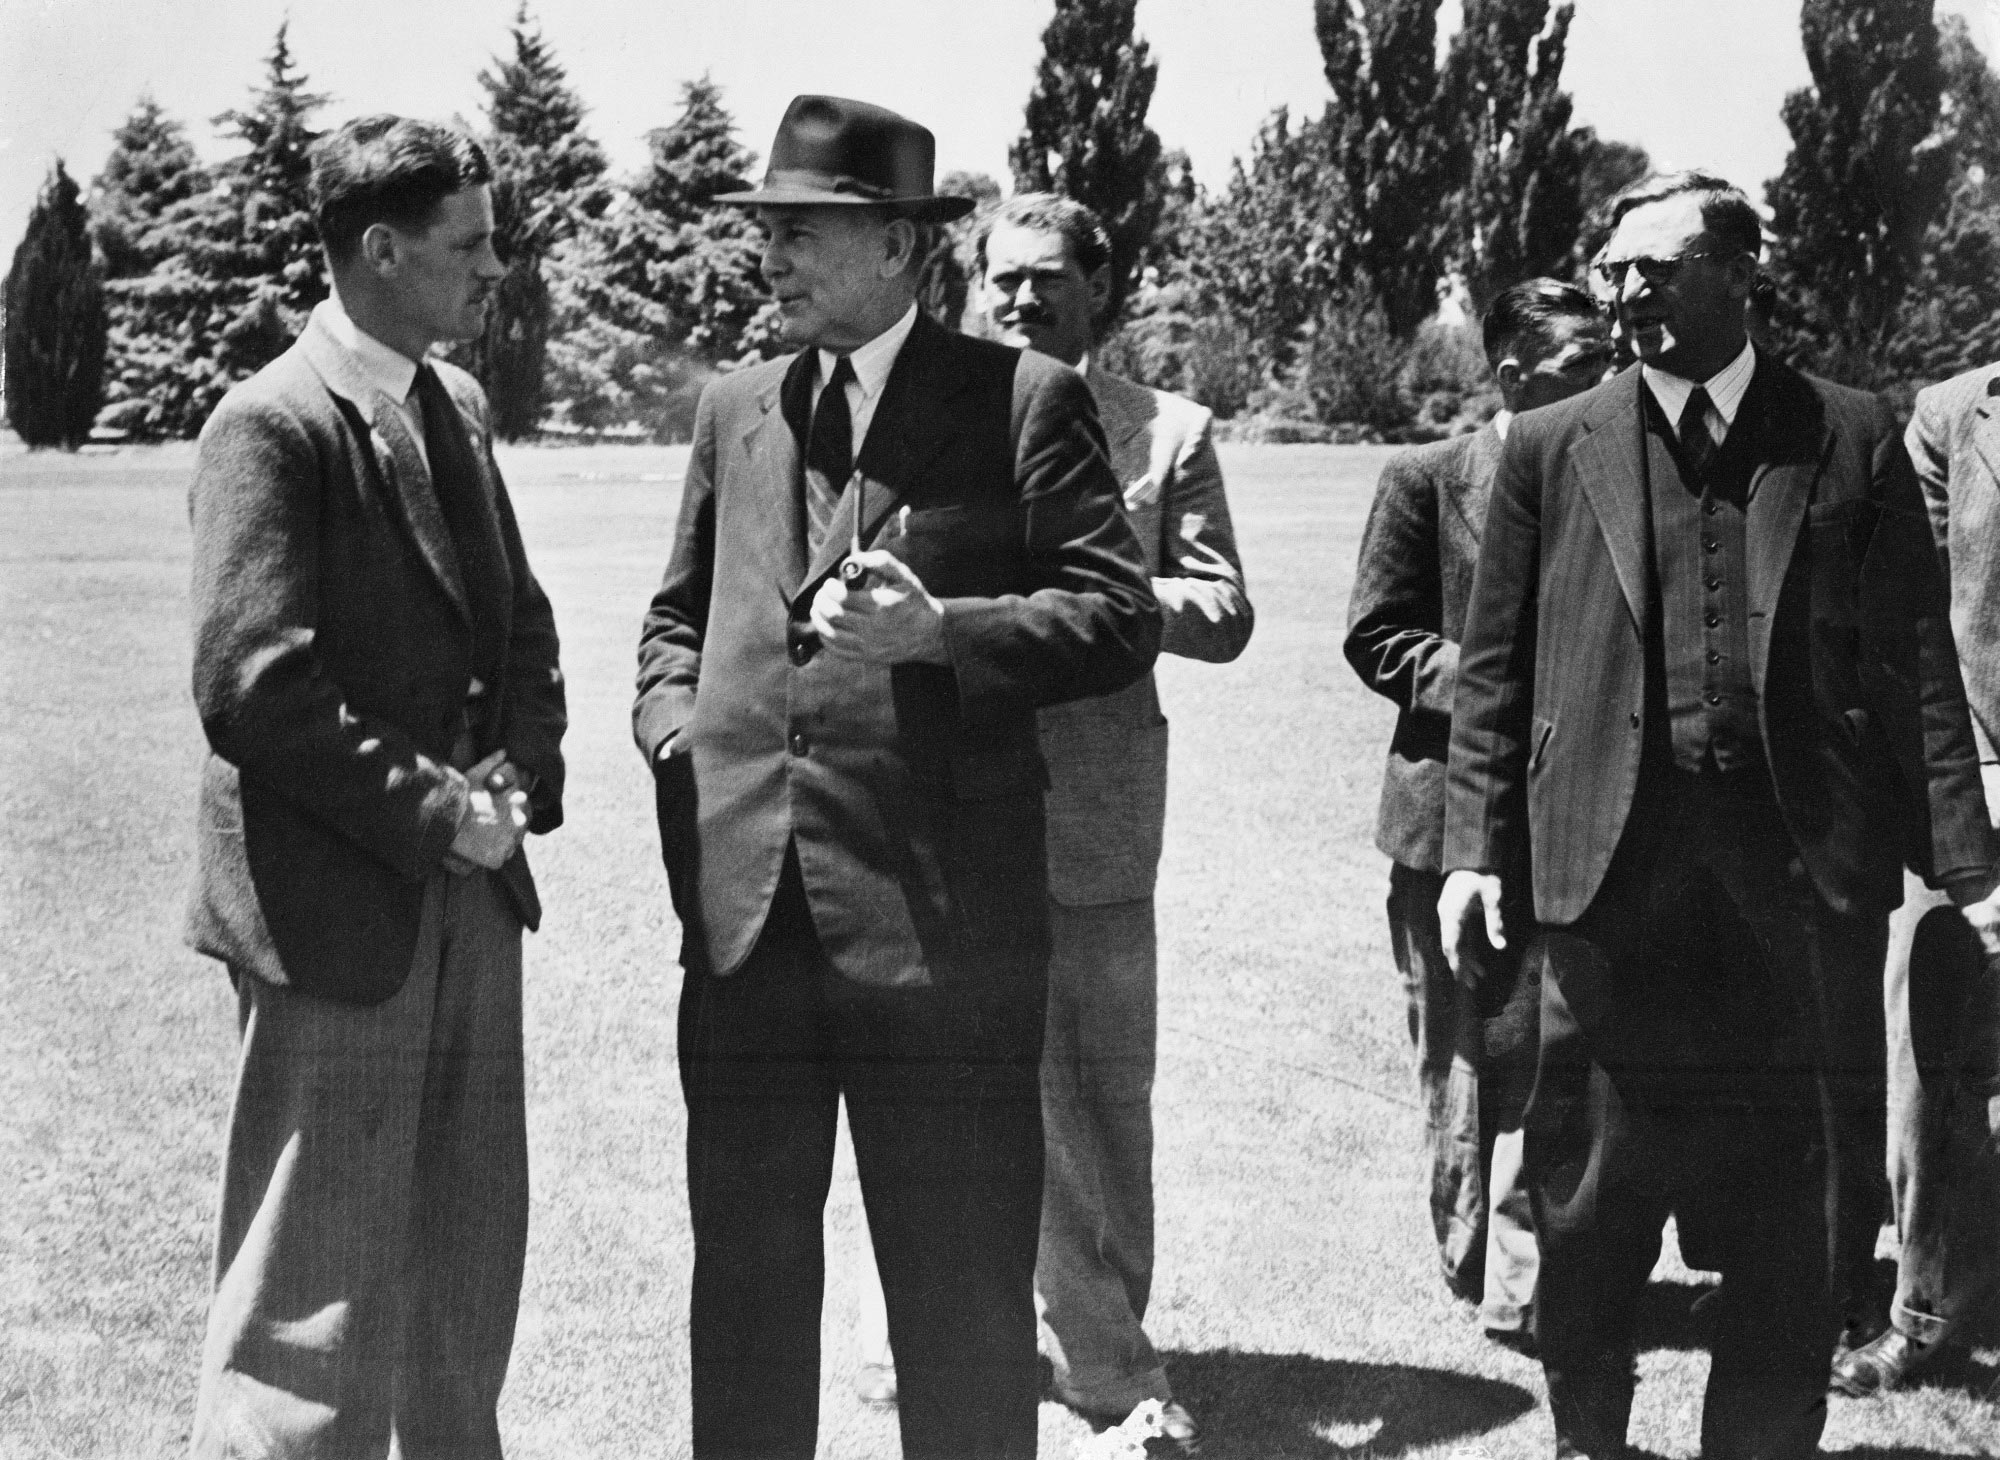 First assisted passage migrant from England, Tommy Smith, meets Prime Minister Ben Chifley and Arthur Calwell, 1947.